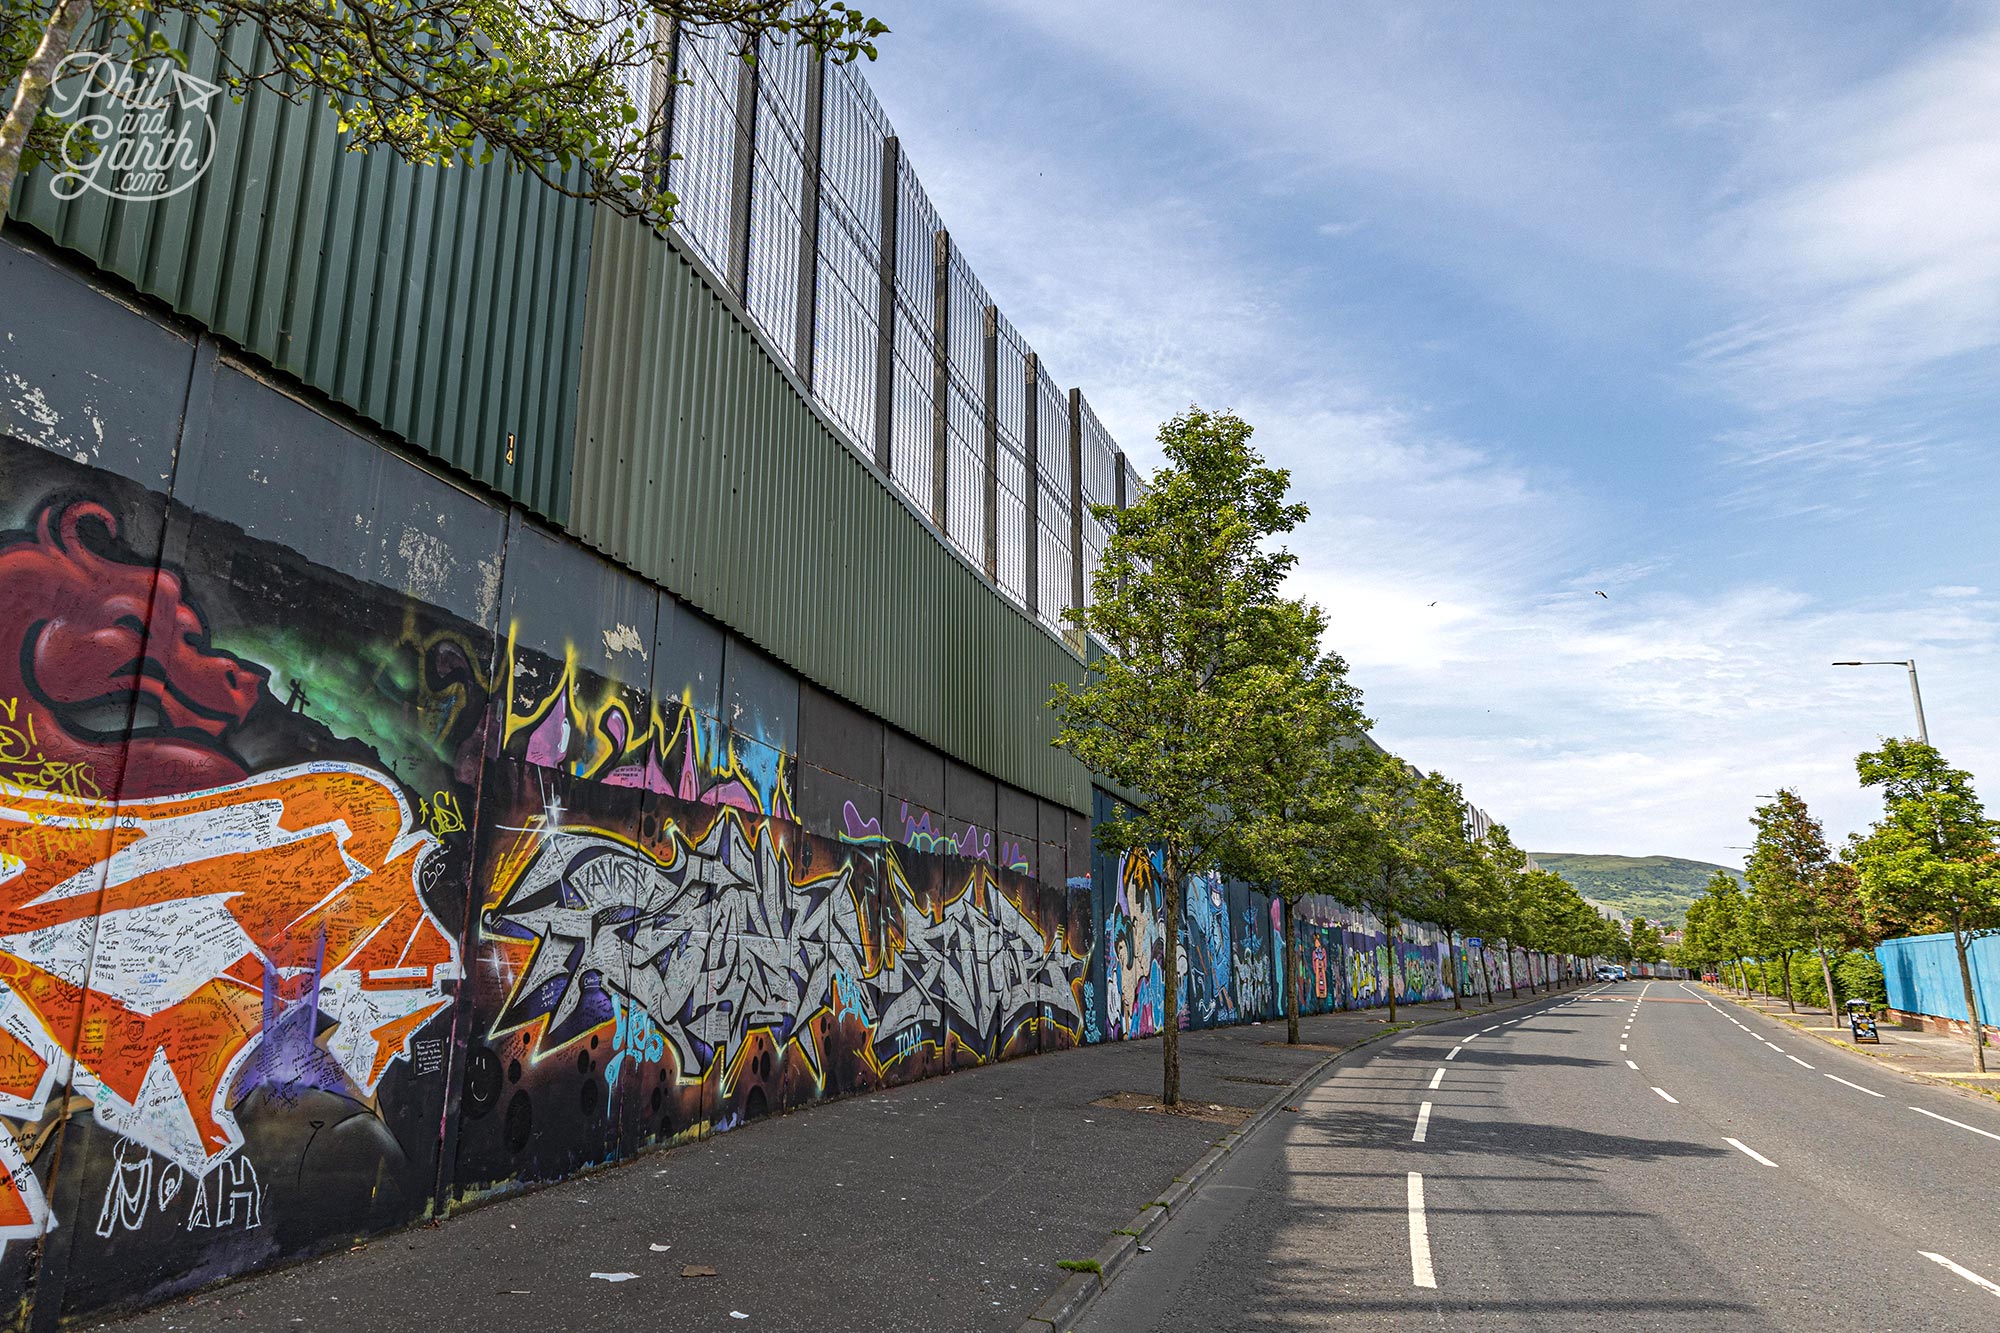 Belfast's Peace Walls divide the Catholic and Protestant communities